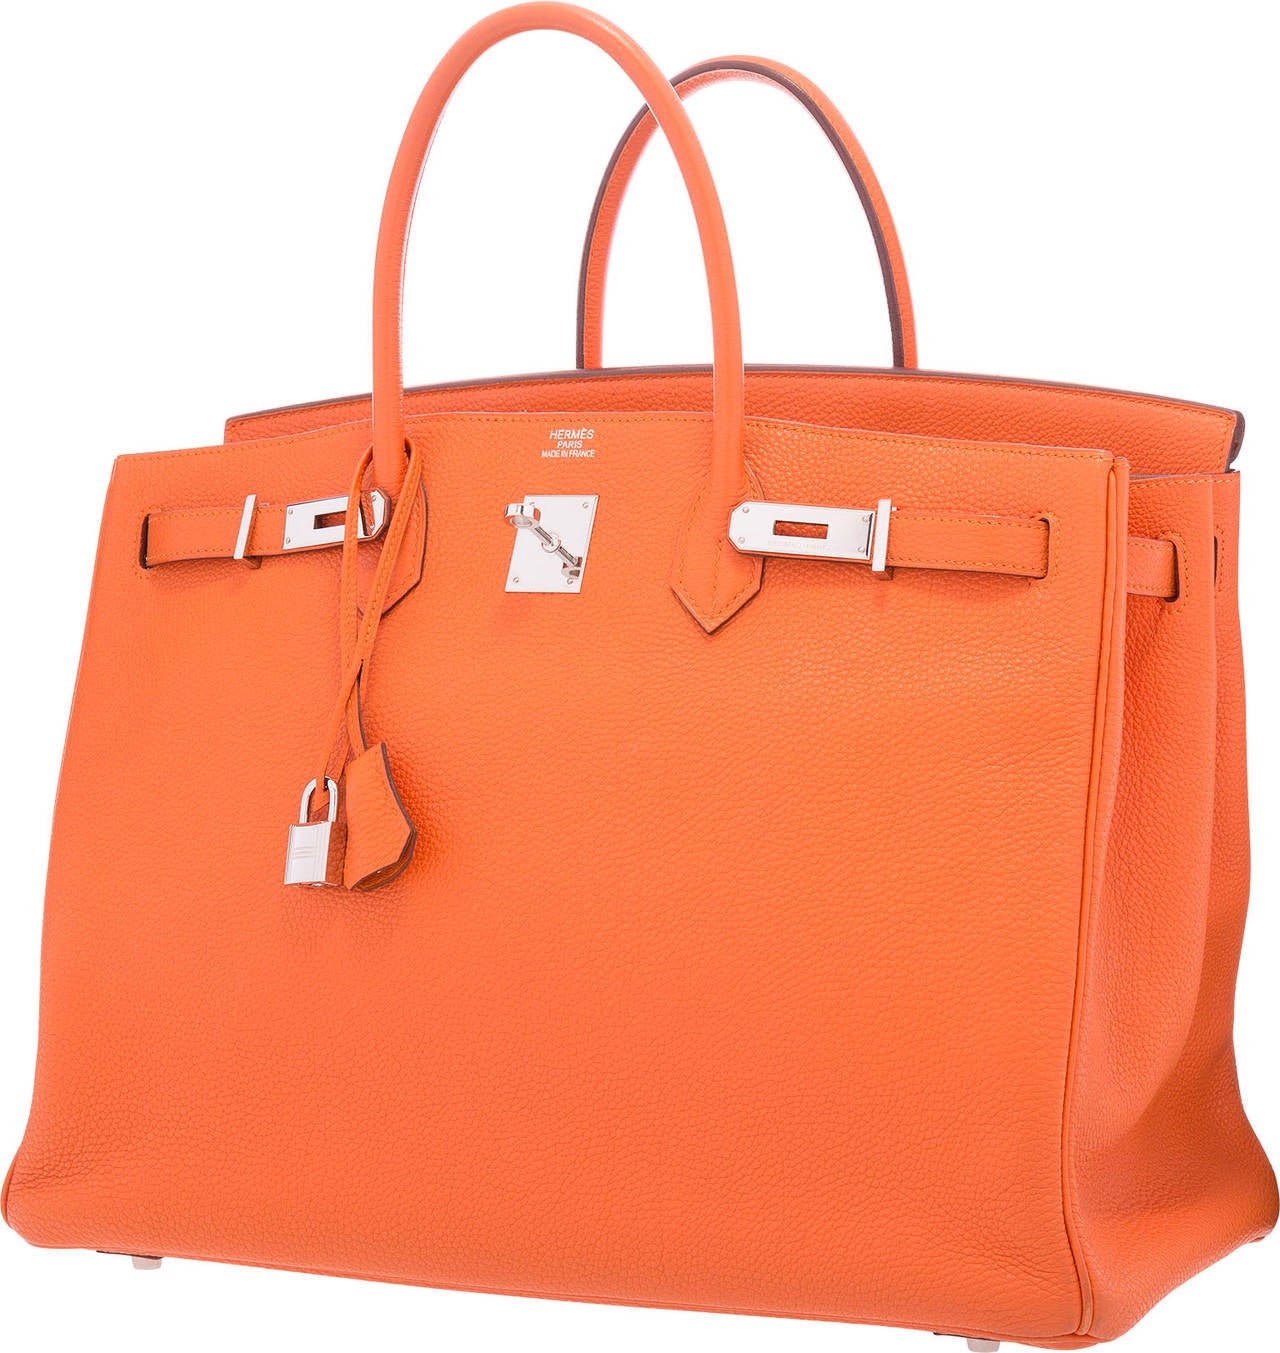 Orange H is one of the most recognizable Hermes colors. It is beautifully vibrant and makes a great addition of color into any collection. This bag is the largest size of the standard Birkin and is perfect for those who like a carry-all. It features